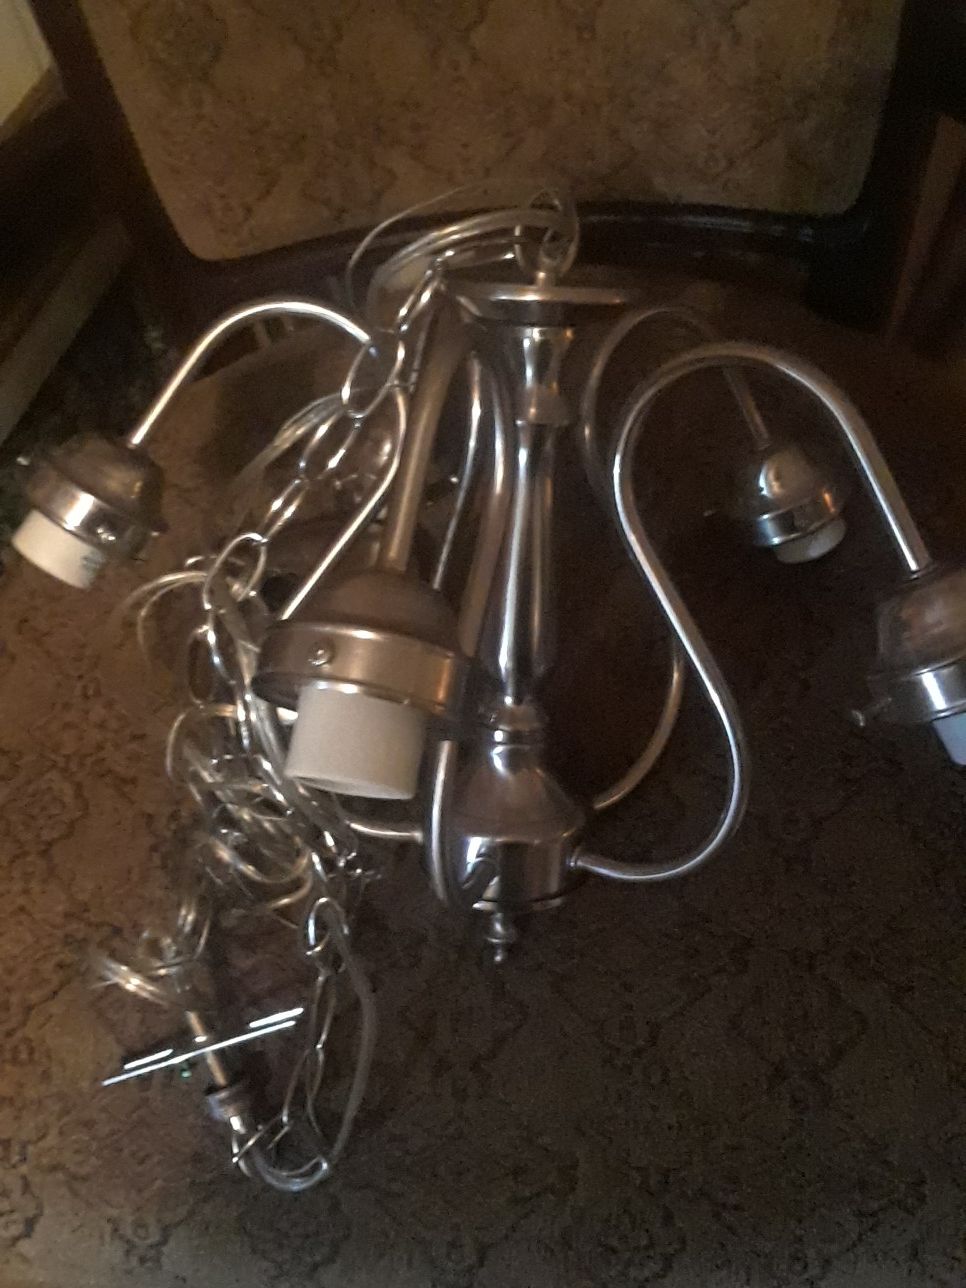 5 light Ceiling fixture nickel finish $25.00 cash only (serious buyers)